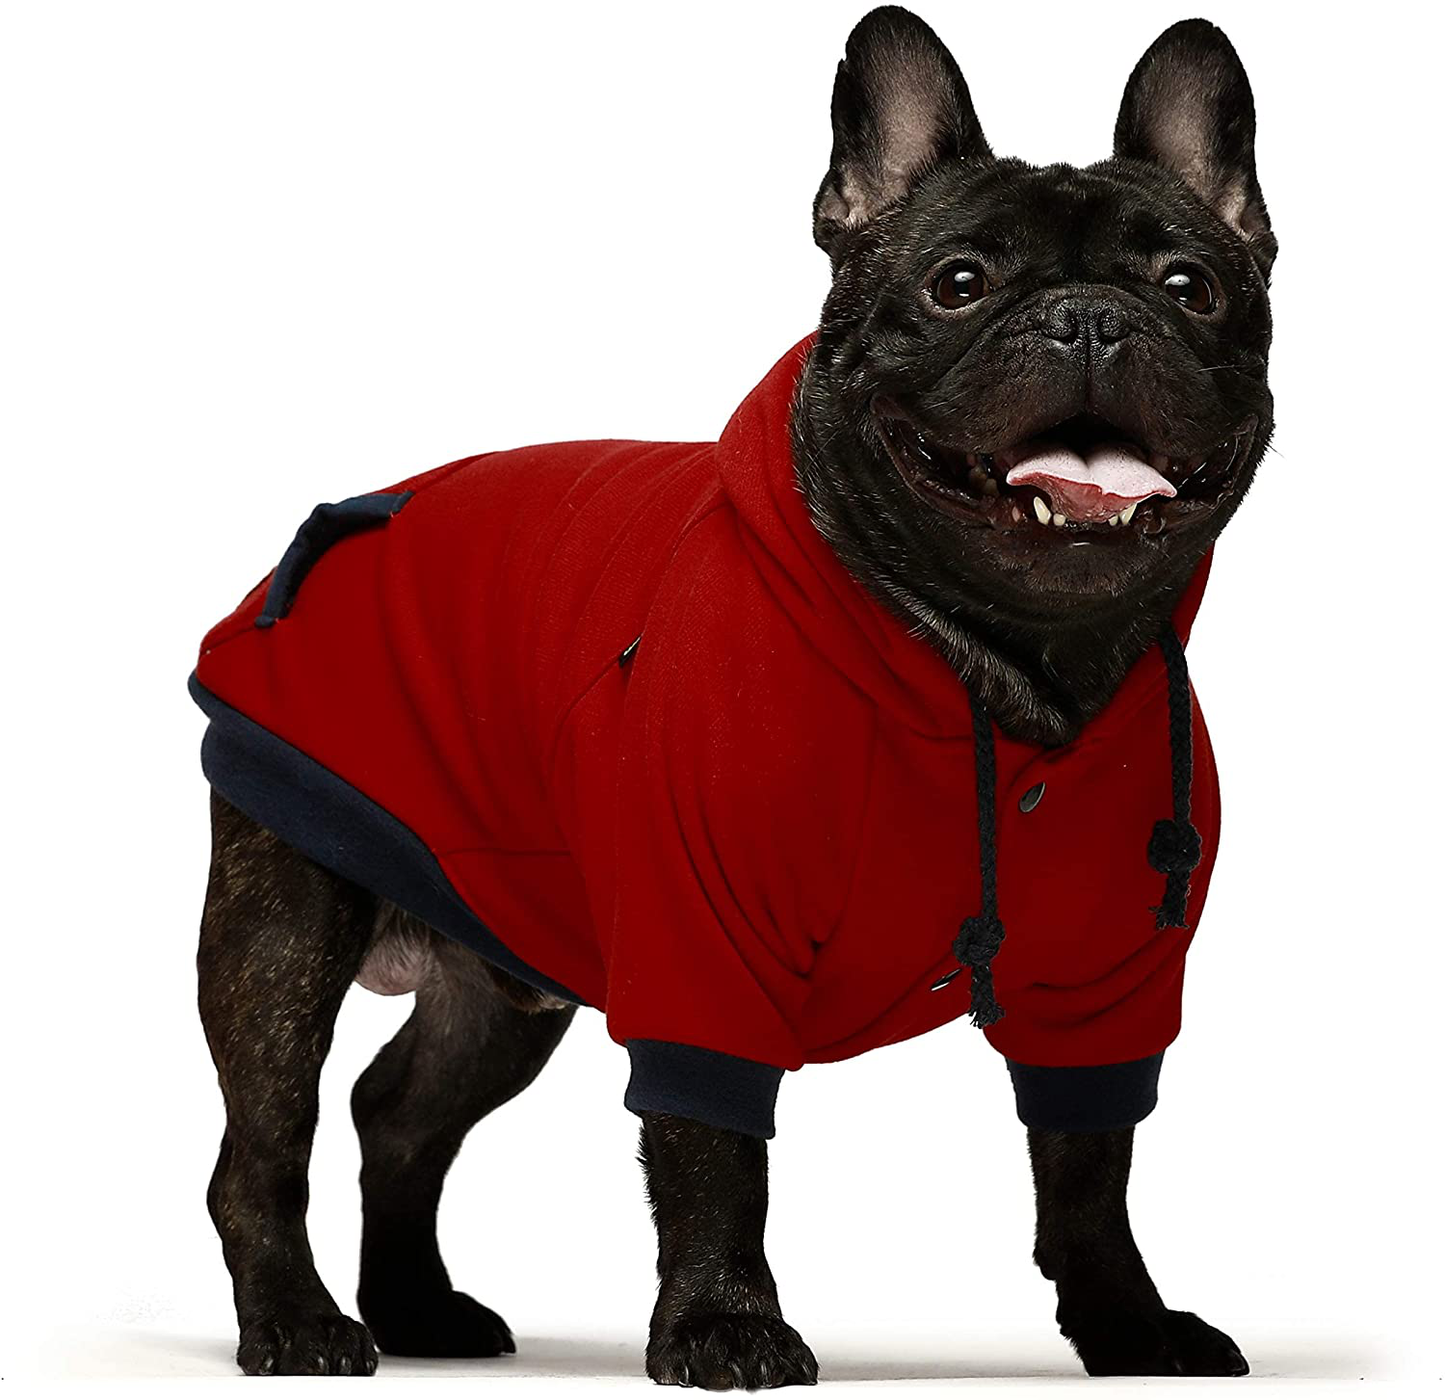 Fitwarm Casual Pet Clothes Dog Hoodies Puppy Pullover Cat Hooded Shirts Sweatshirts